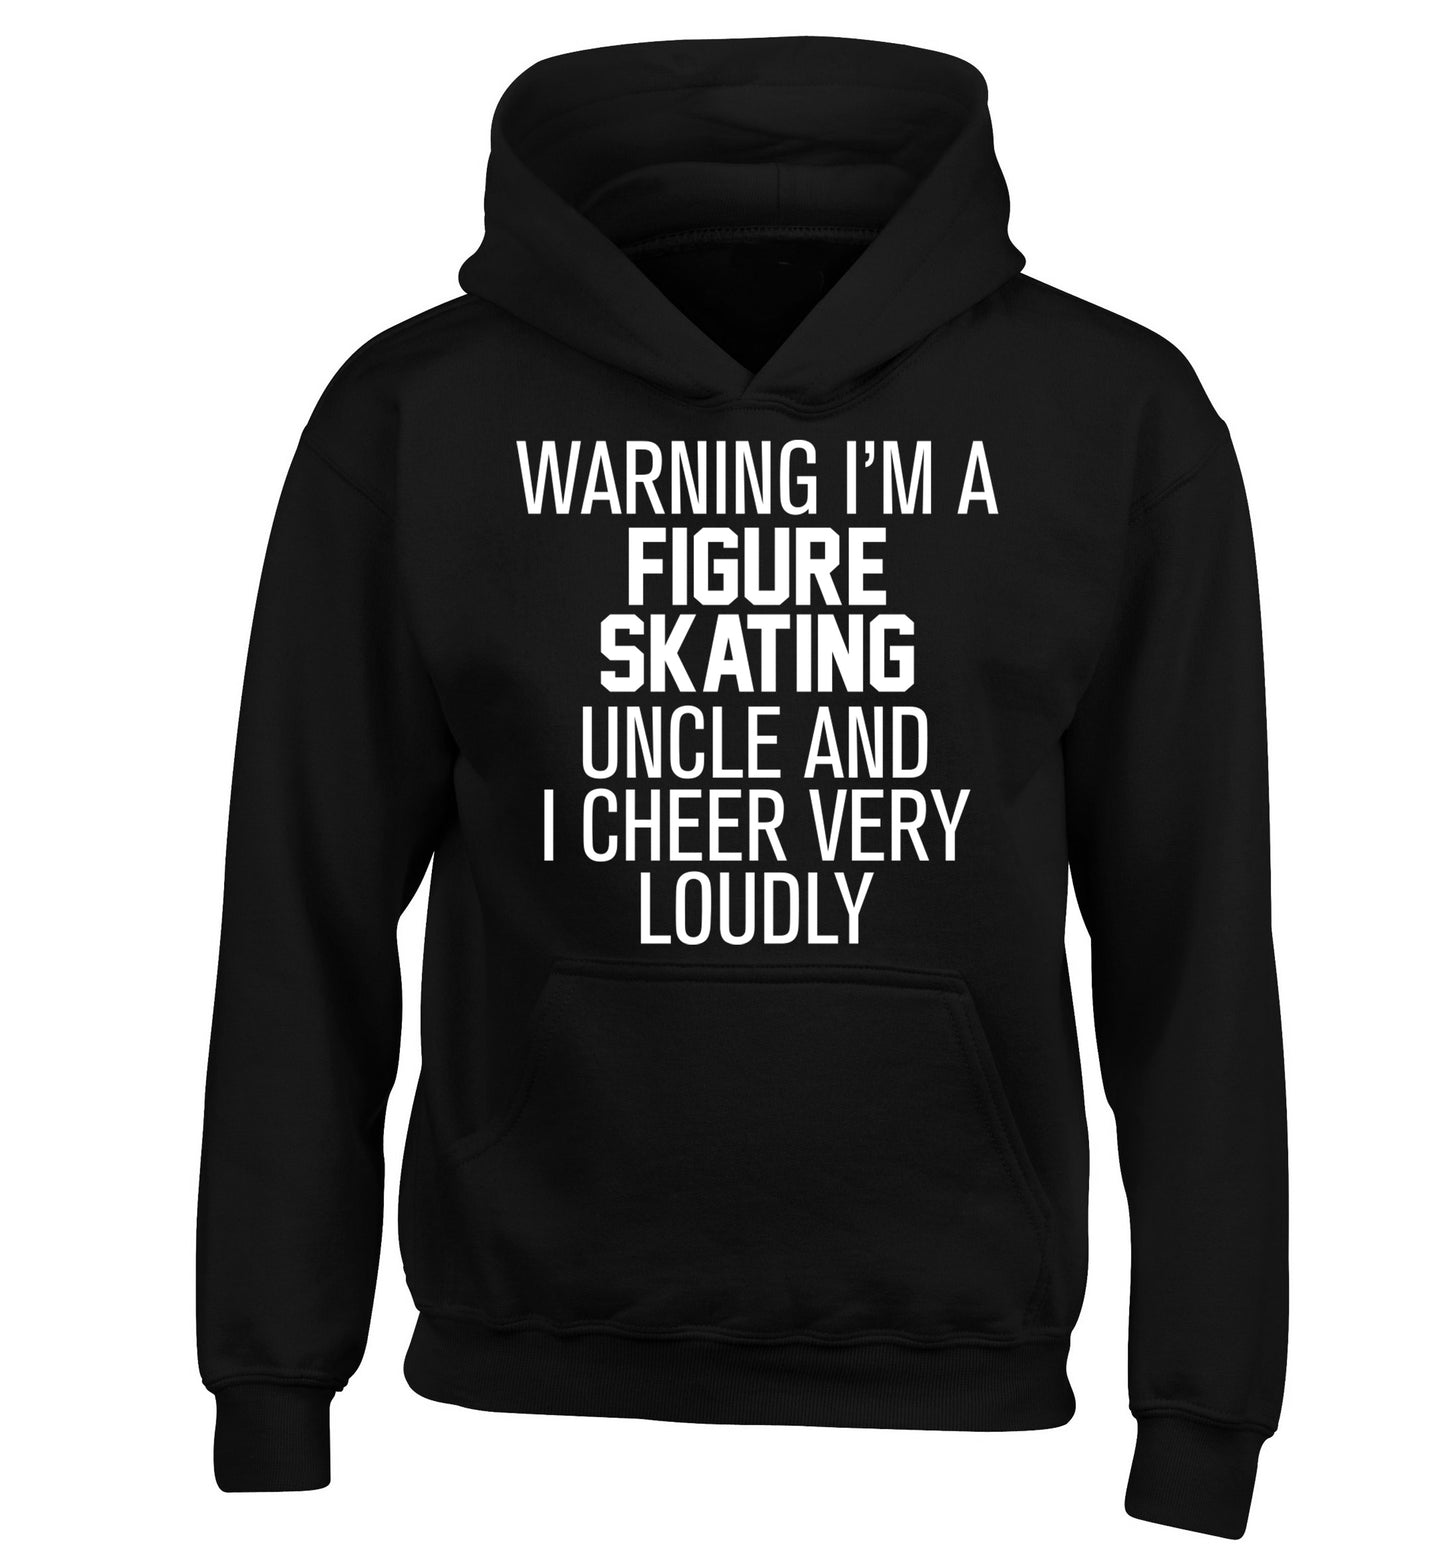 Warning I'm a figure skating uncle and I cheer very loudly children's black hoodie 12-14 Years